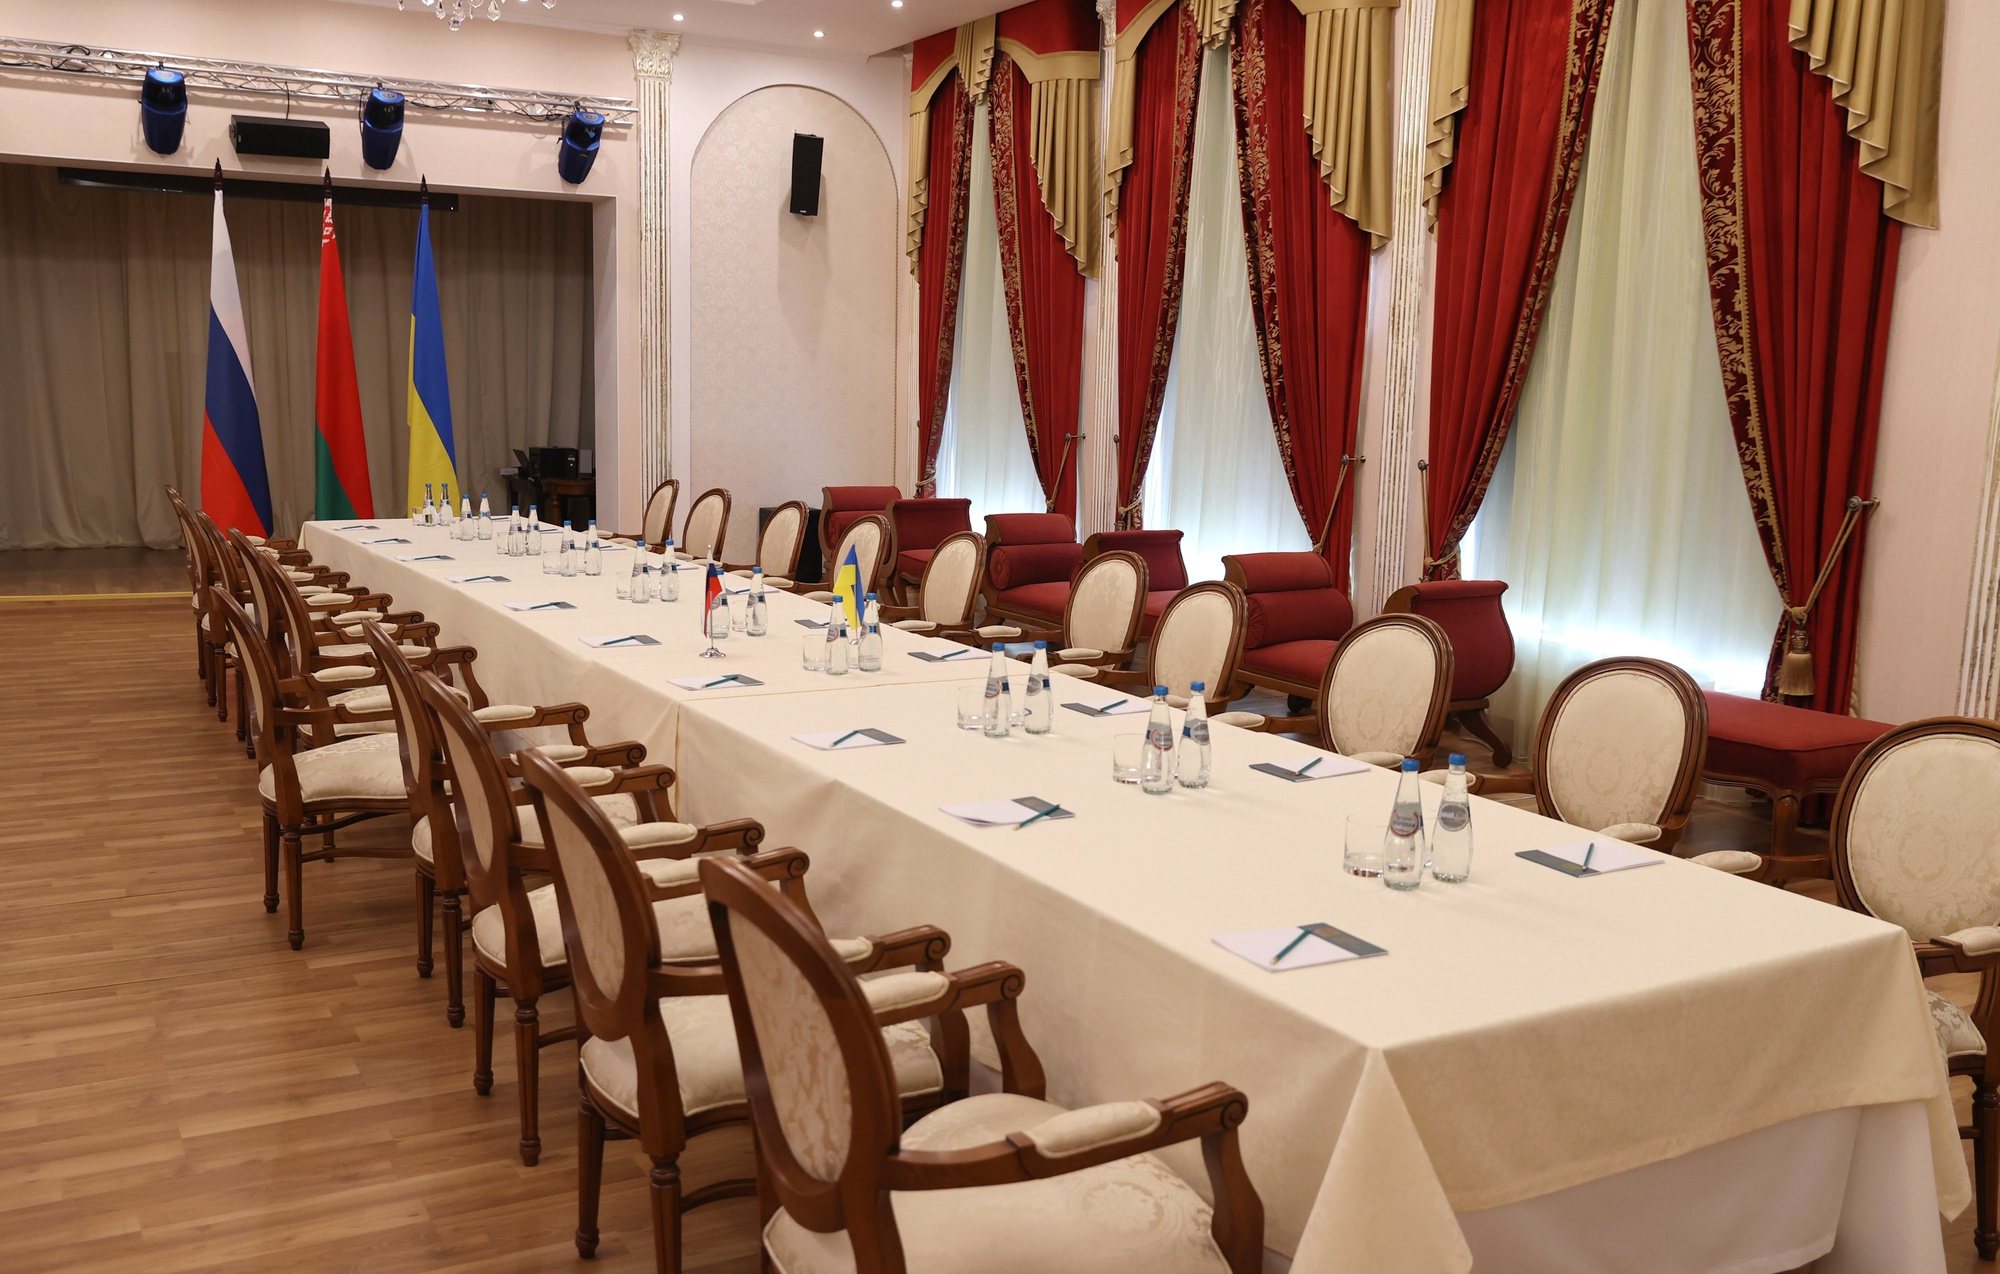 epa09791270 A handout picture made available by Belta news agency shows a hall at Rumyantsev-Paskevich Palace, the venue hosting the talks between Ukrainian and Russian delegations, in Grodno, Belarus, 28 February 2022. Russian troops entered Ukraine on 24 February prompting the country&#039;s president to declare martial law and triggering a series of announcements by Western countries to impose severe economic sanctions on Russia.  EPA/BELTA HANDOUT  HANDOUT EDITORIAL USE ONLY/NO SALES